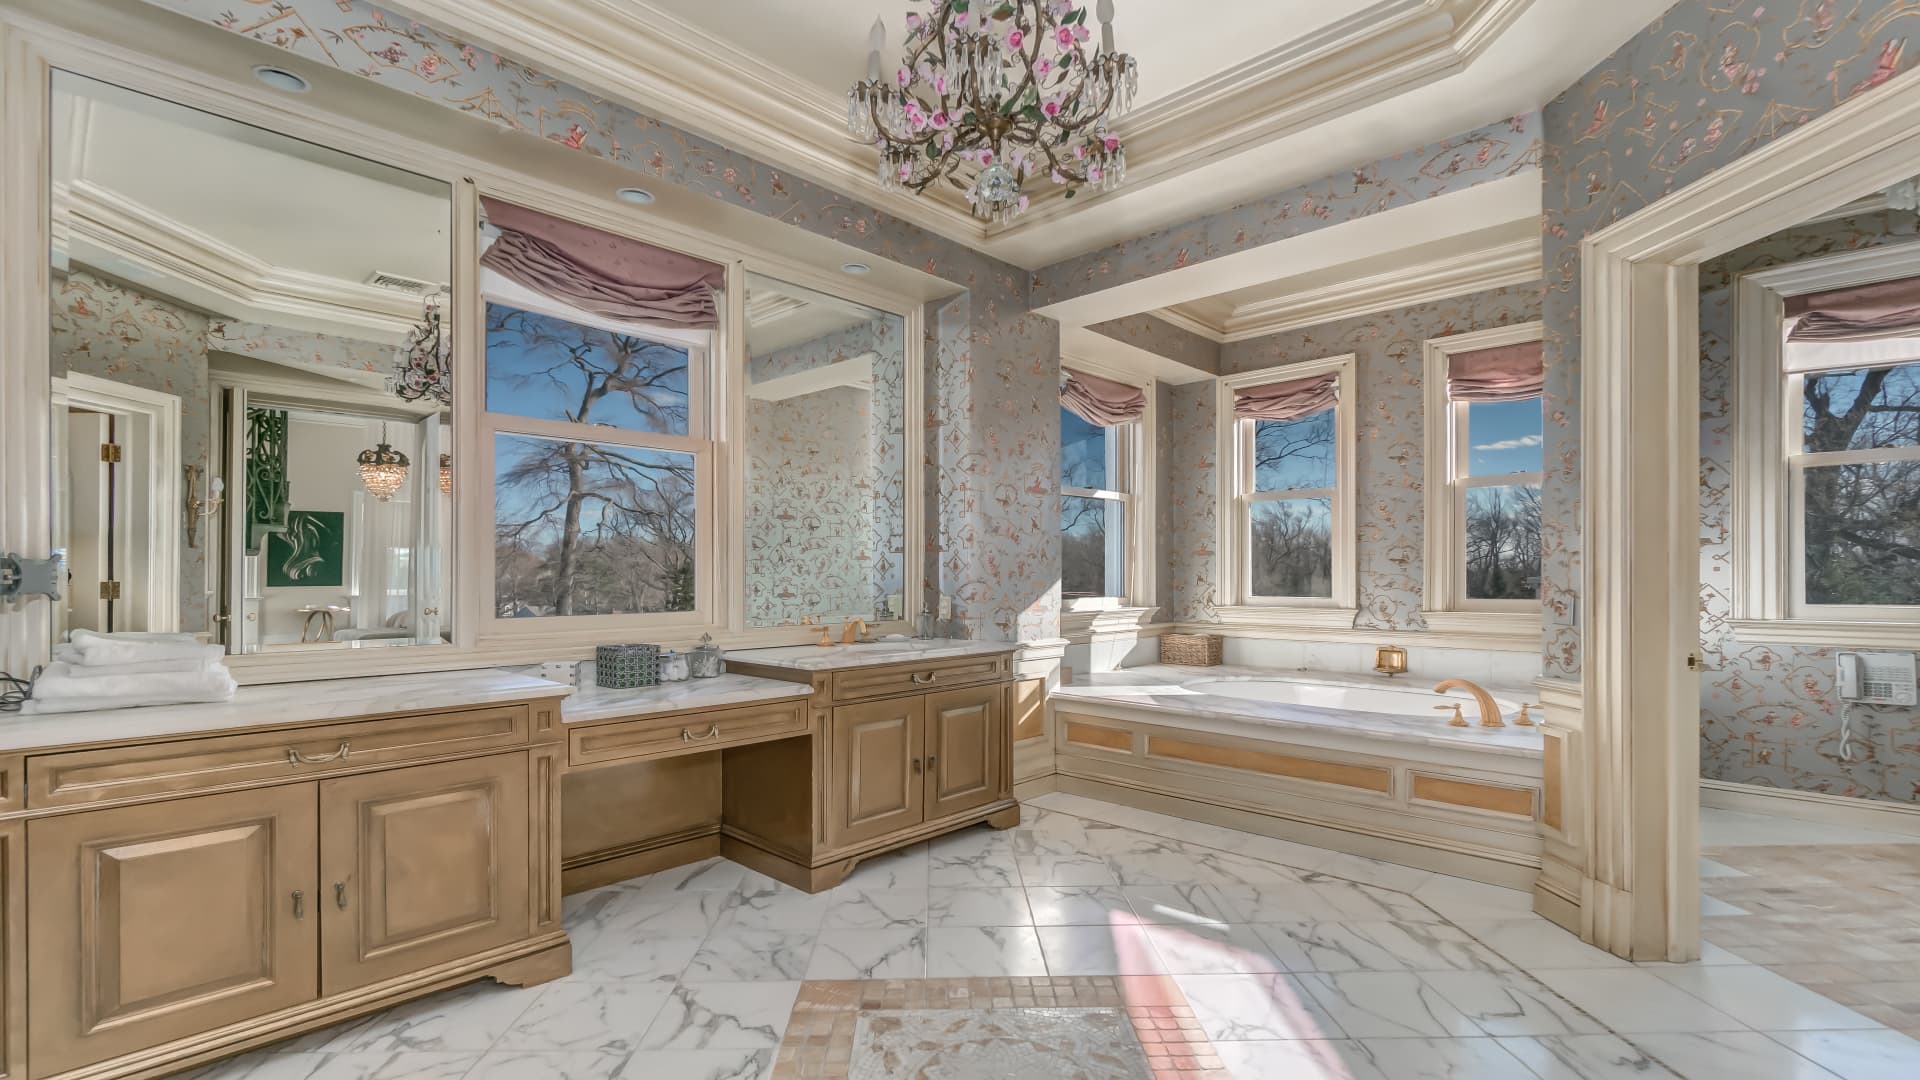 A look inside one of the home's 14 bathrooms.